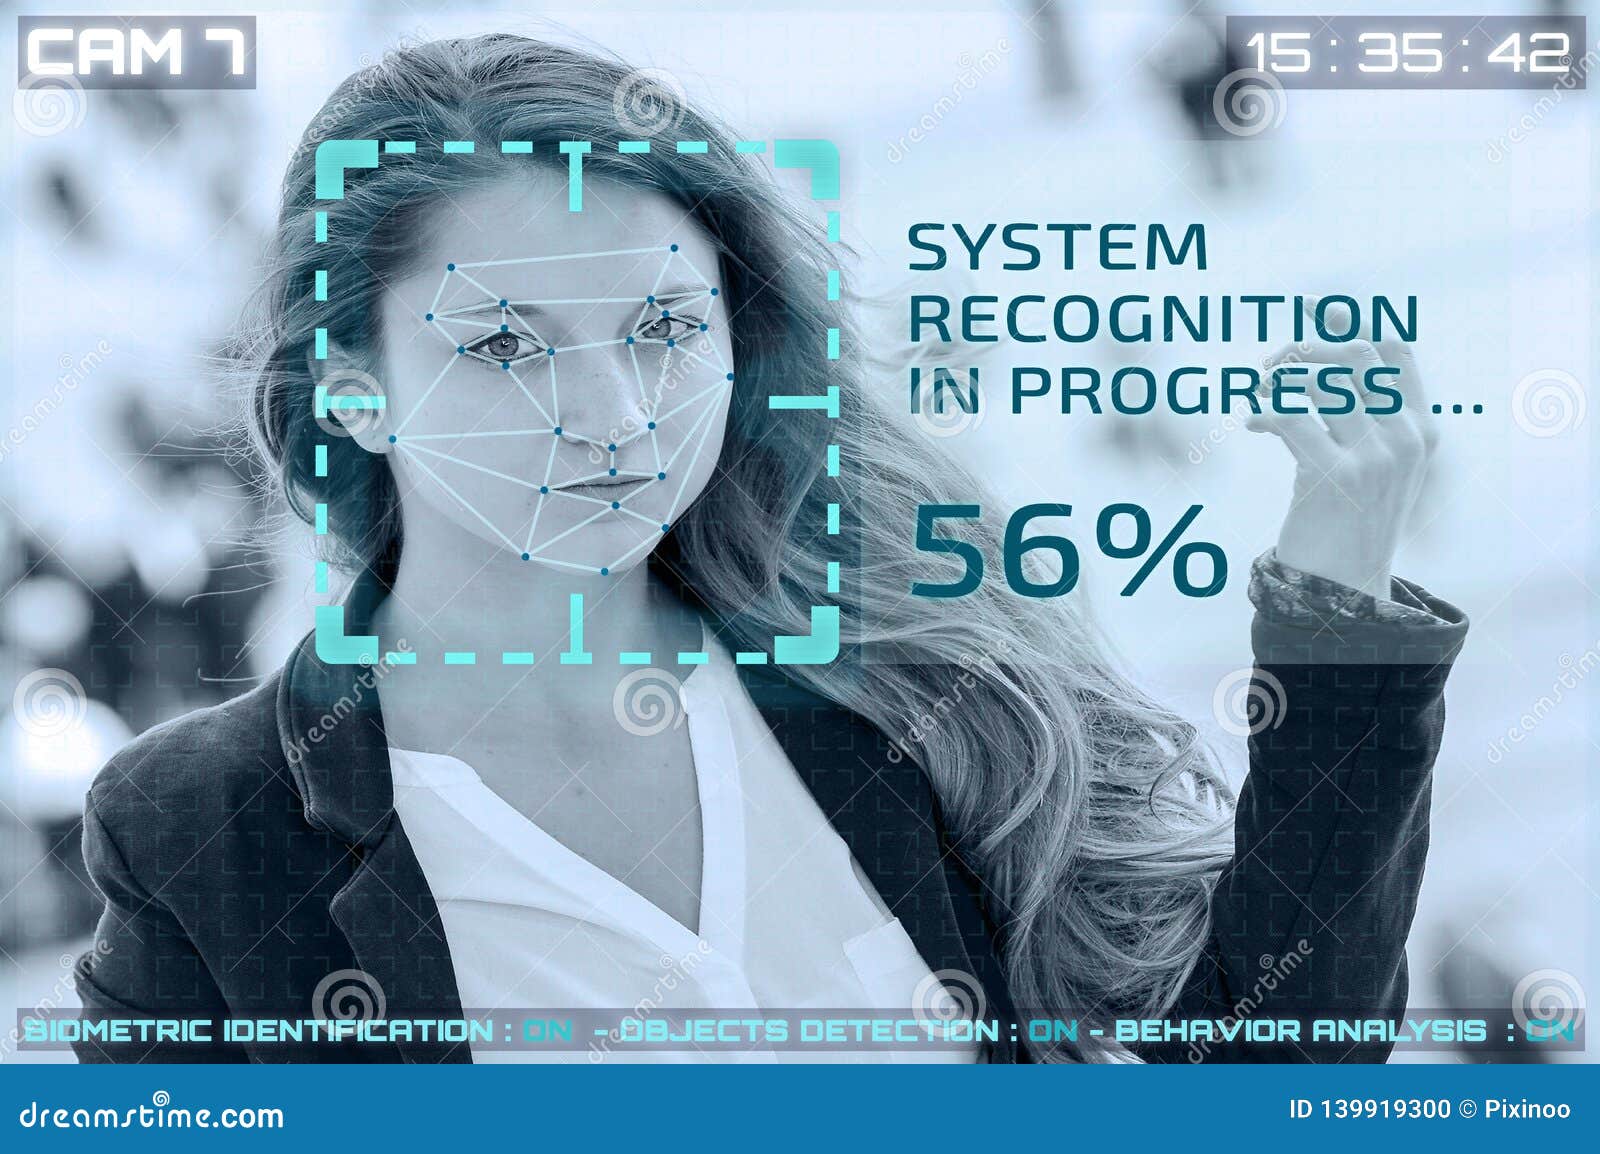 simulation cctv cameras with woman facial recognition